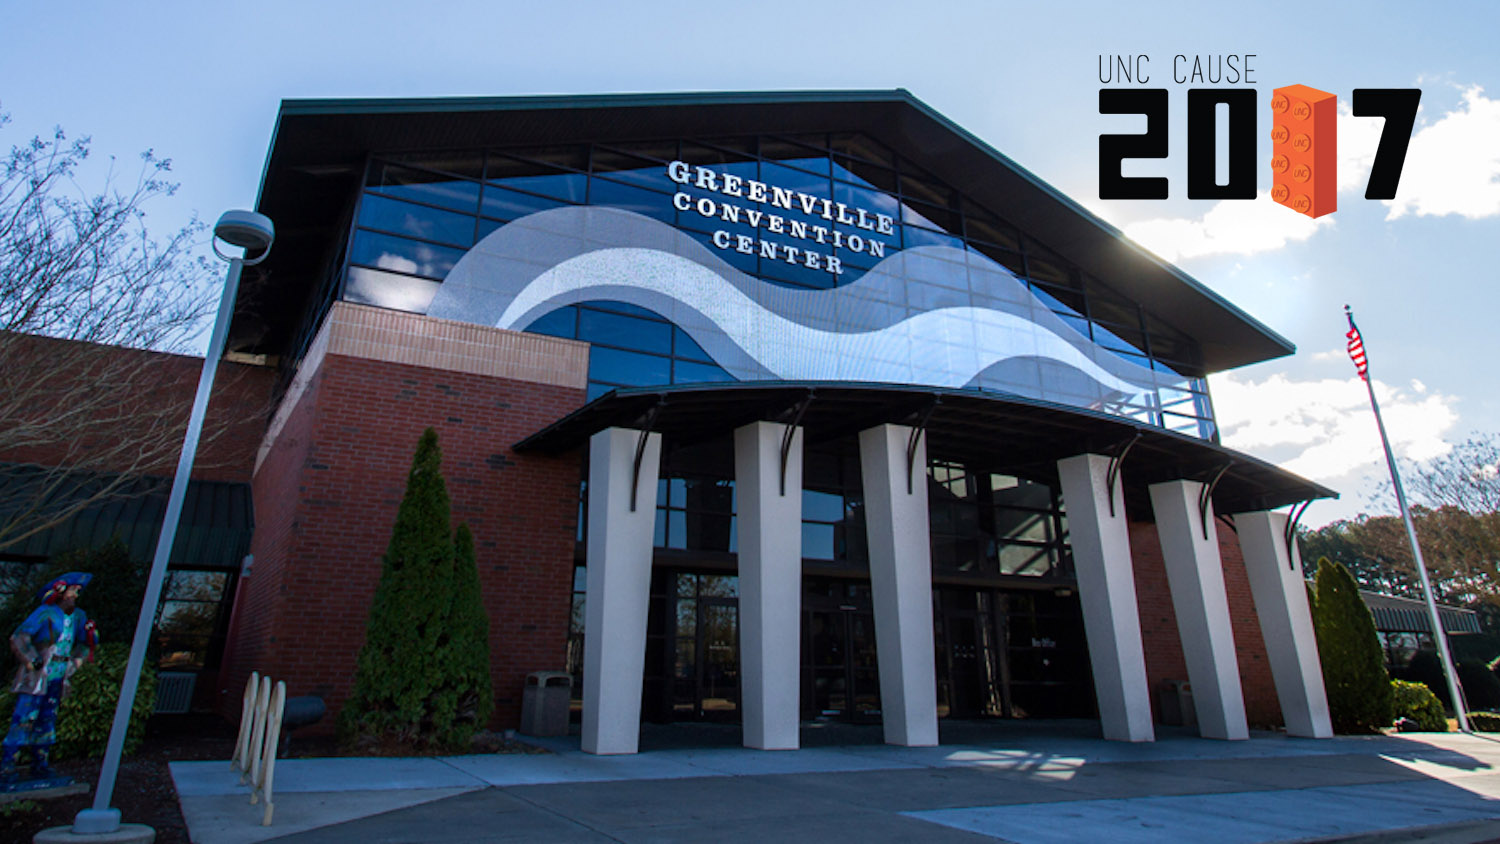 Photo of Greenville Convention Center with UNC CAUSE 2017 conference logo